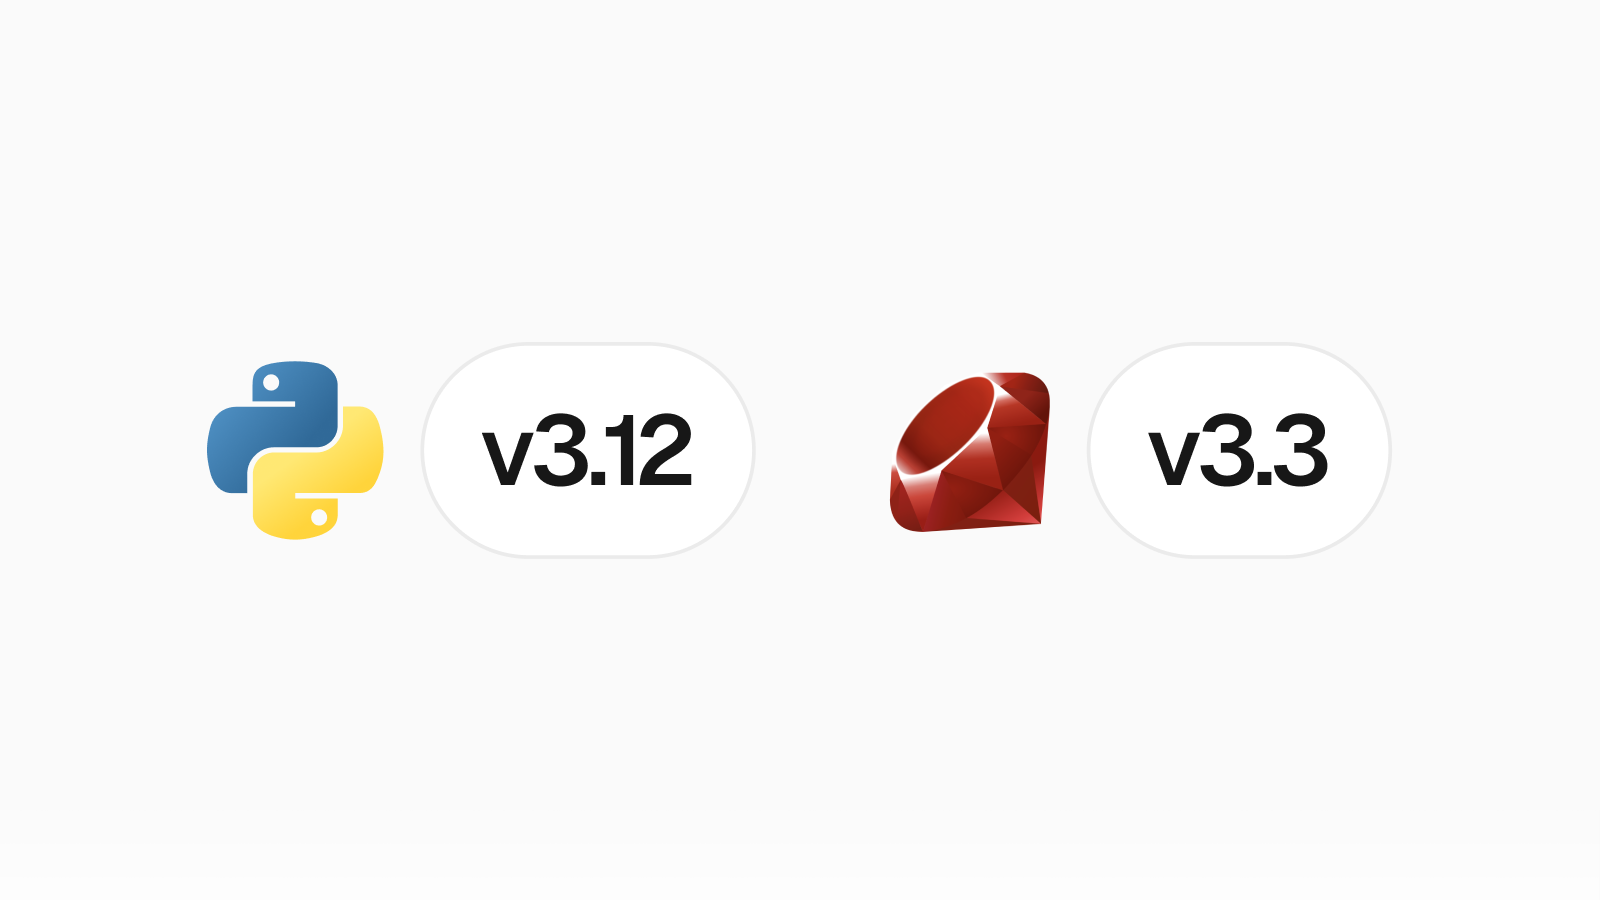 Cover for Python 3.12 and Ruby 3.3 are now available